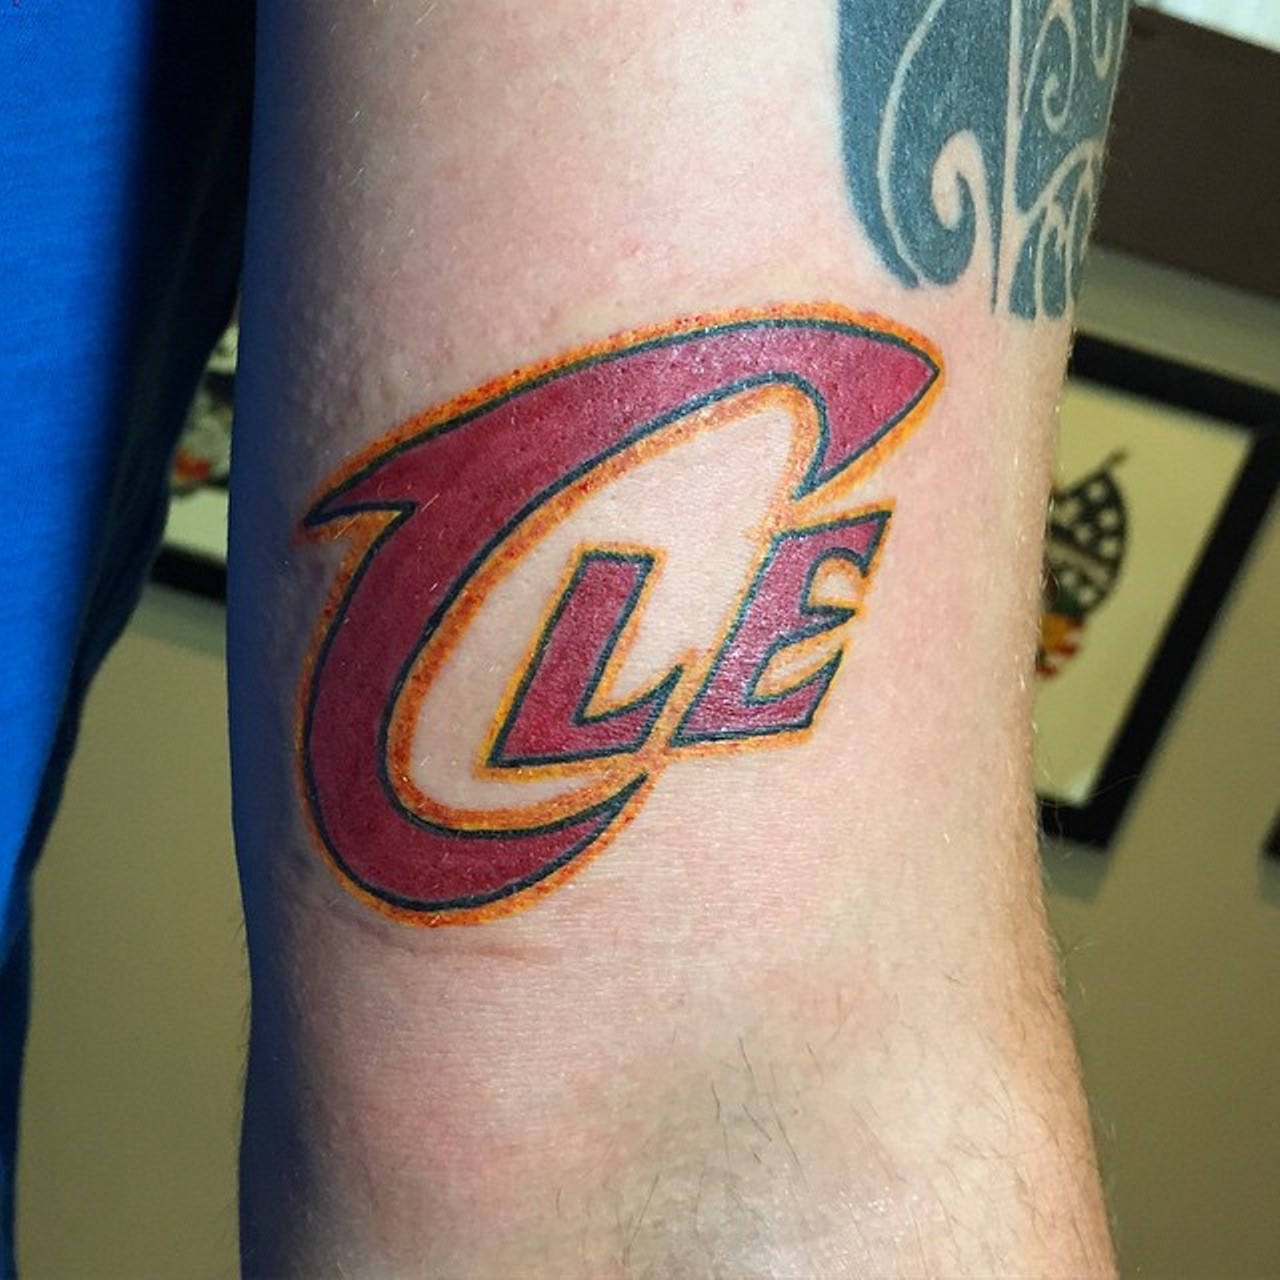 Tribal Ink Mike Clevingers tattoos reveal unique free spirit of Cleveland  Indians pitcher  clevelandcom